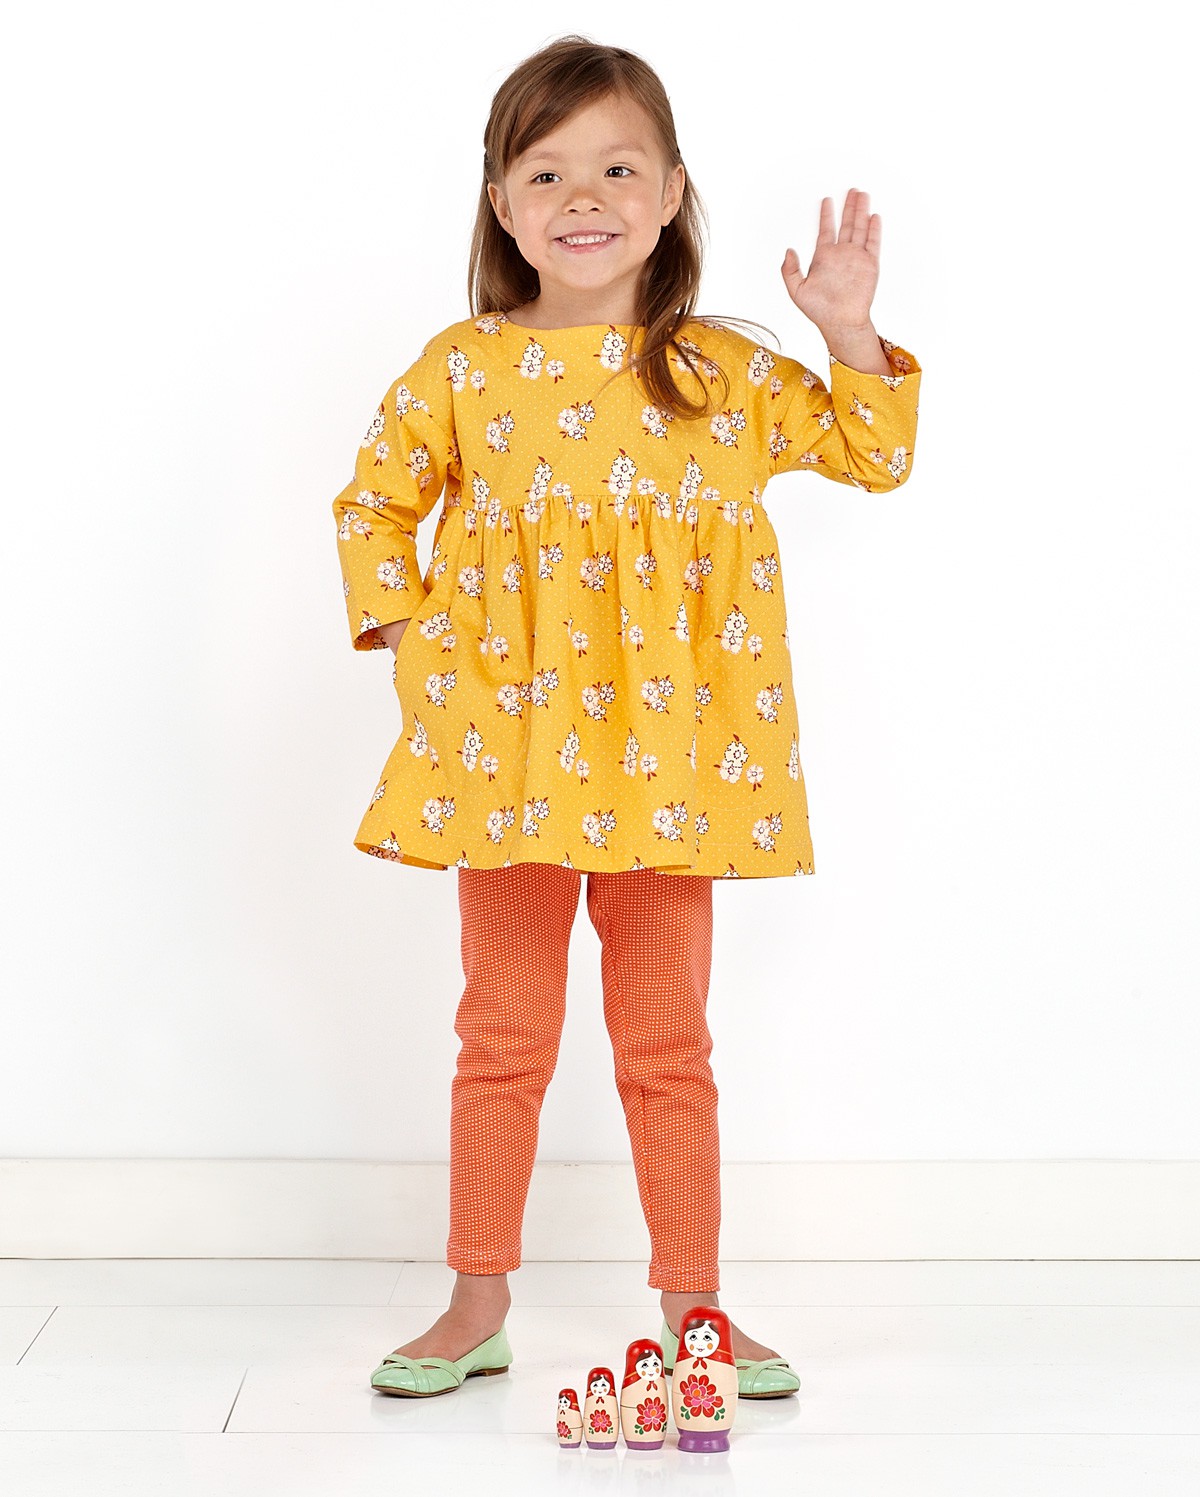 Introducing the Playtime Dress, Tunic + Leggings Sewing Pattern